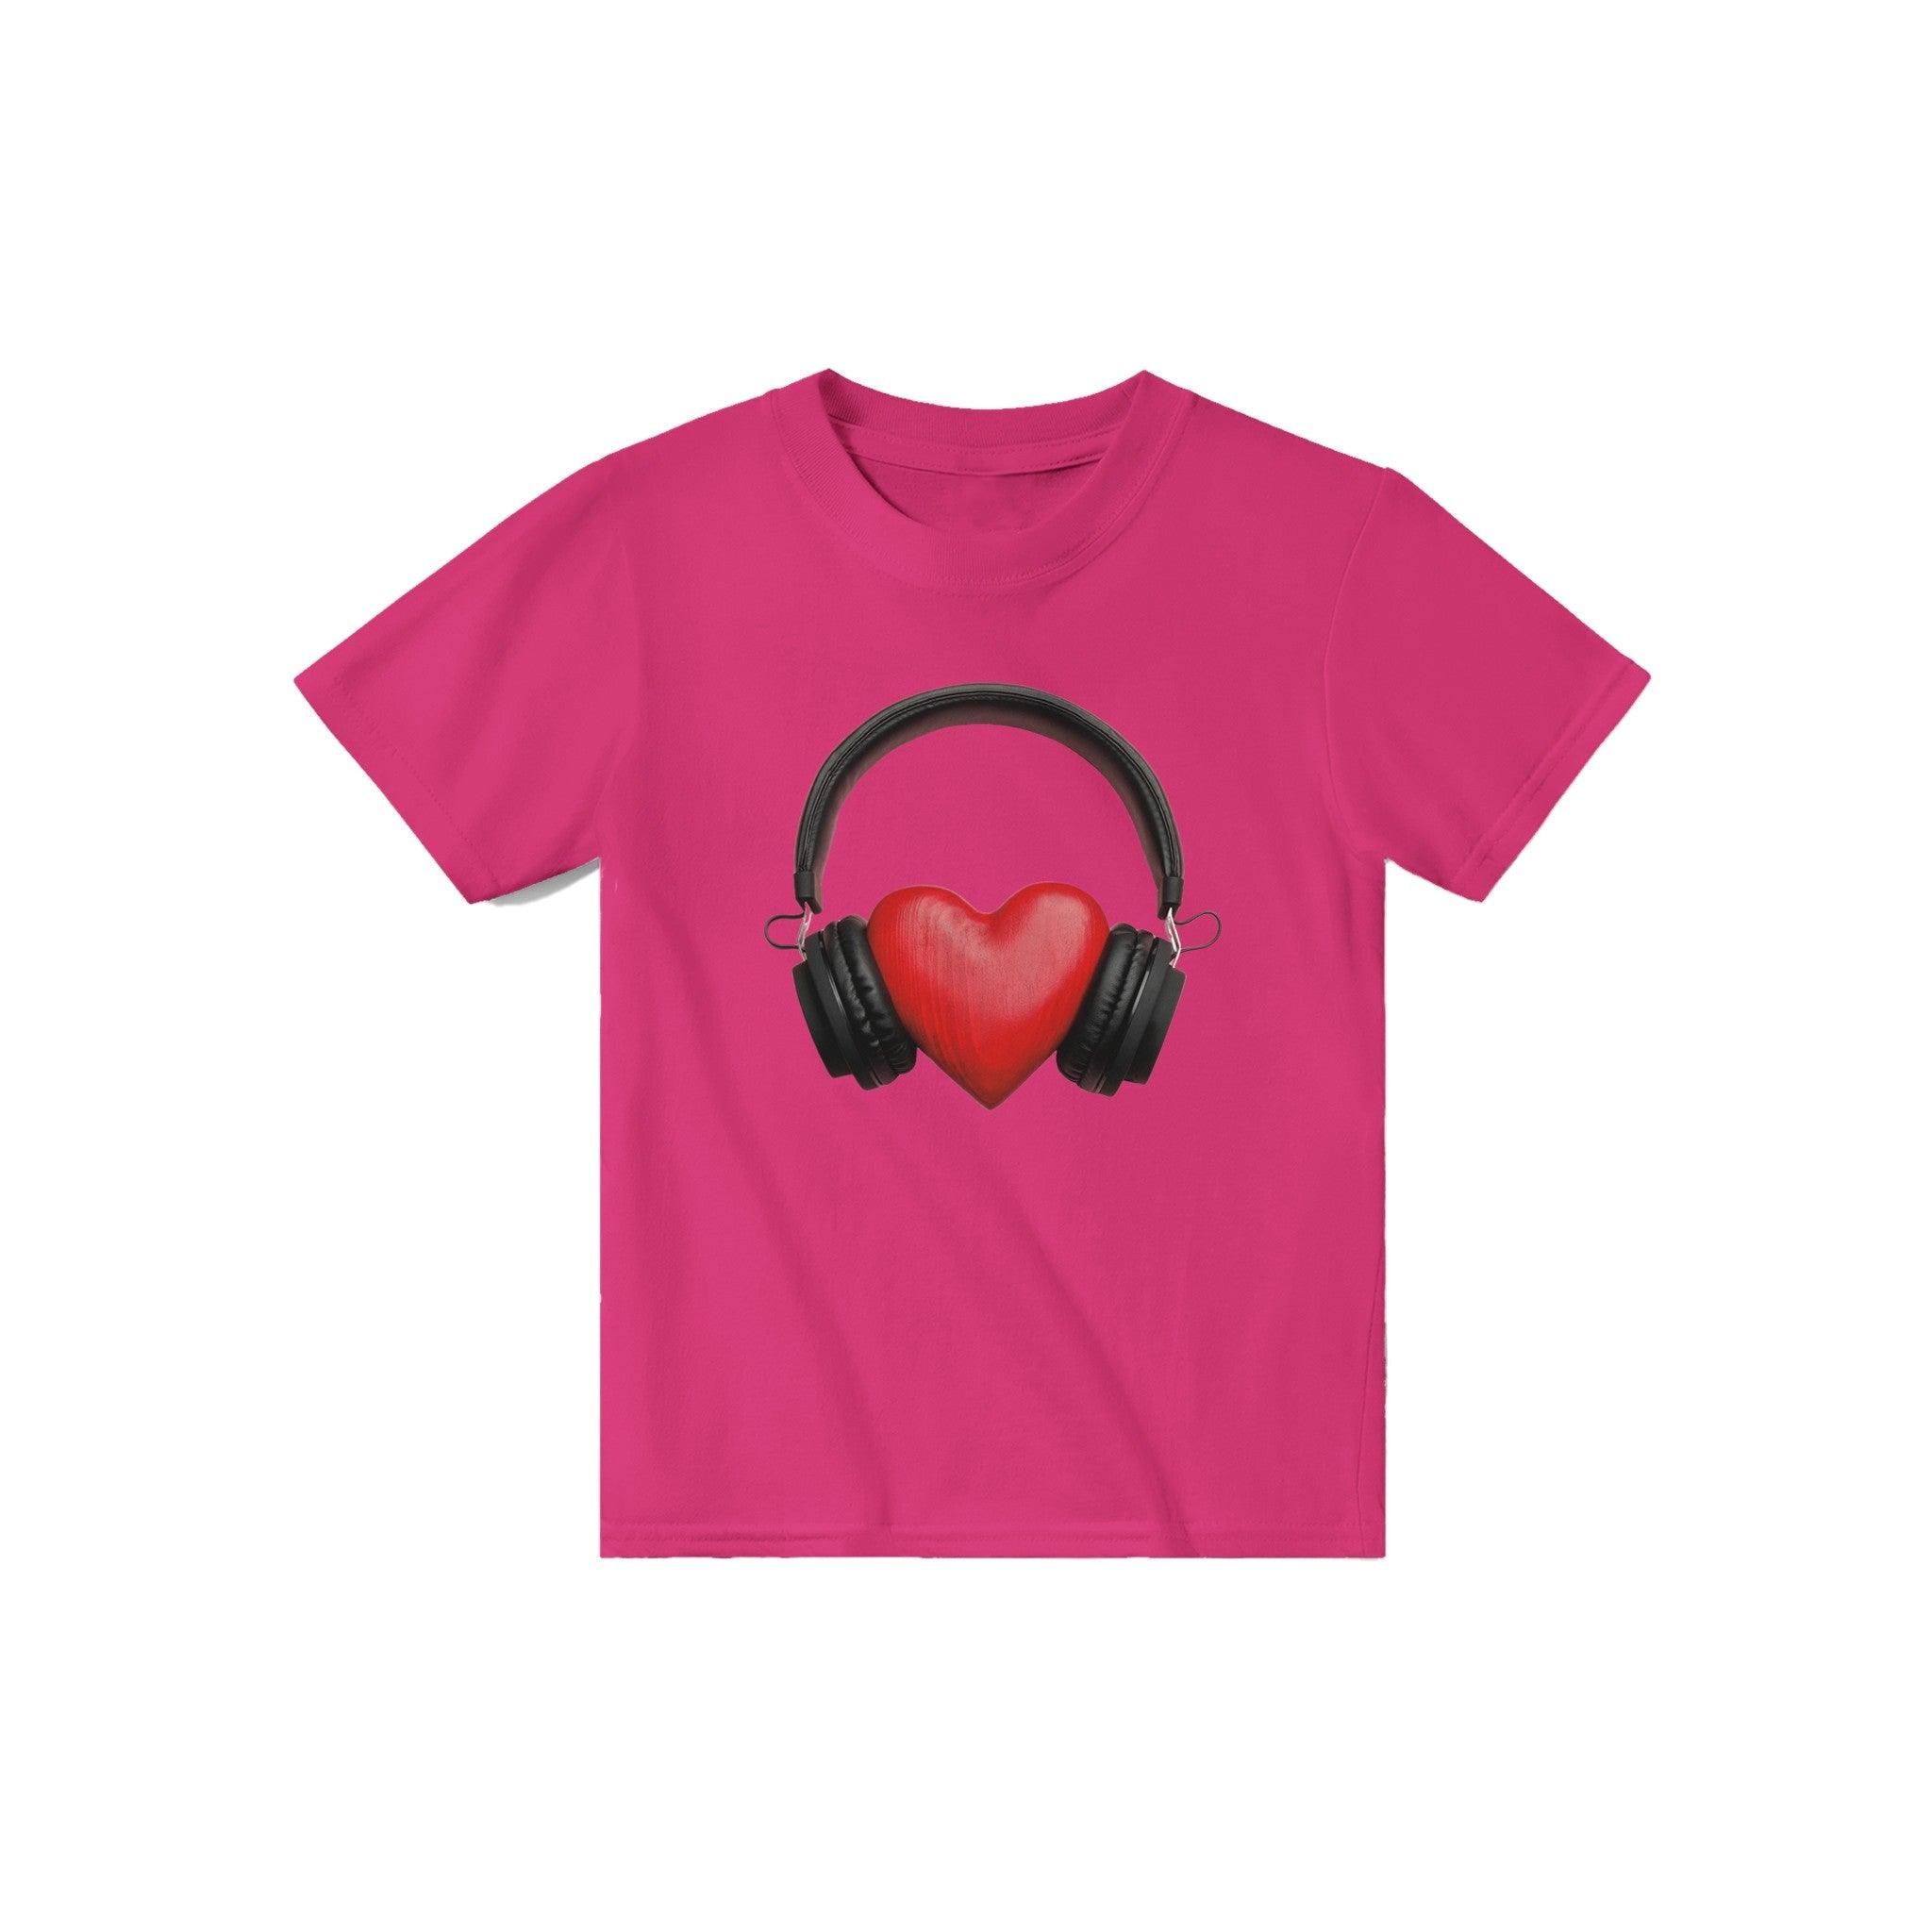 'In Love With Music' Baby Tee - POMA